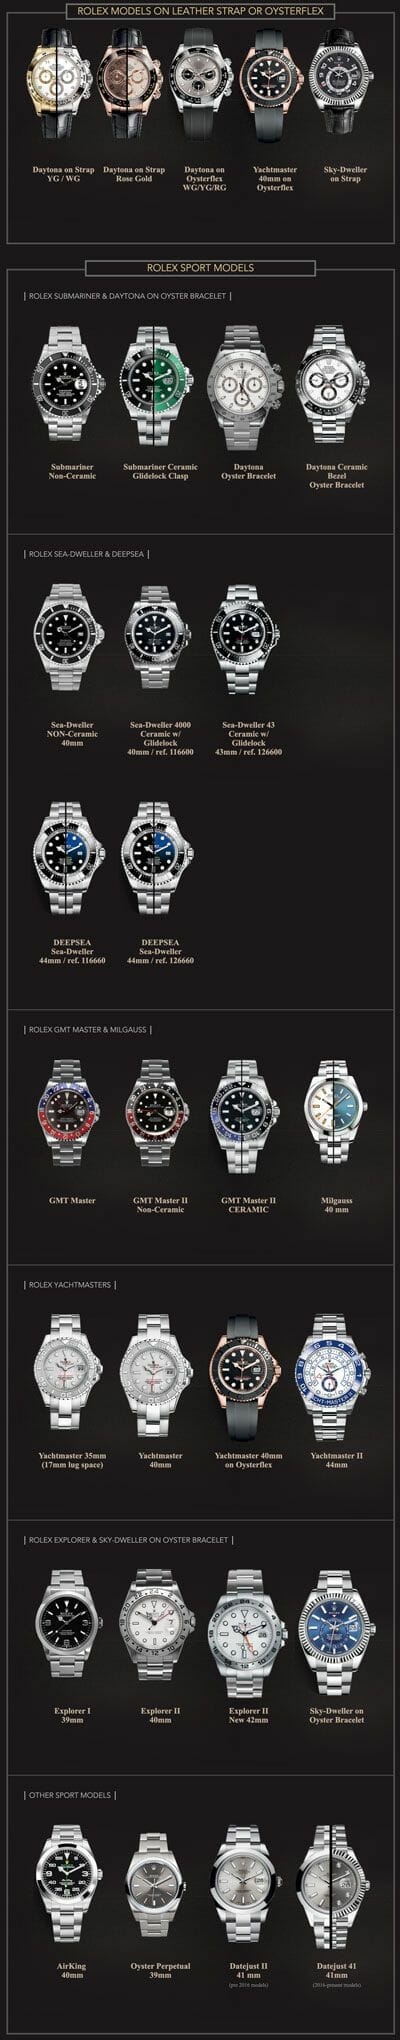 How to Find your Rolex Model Number?